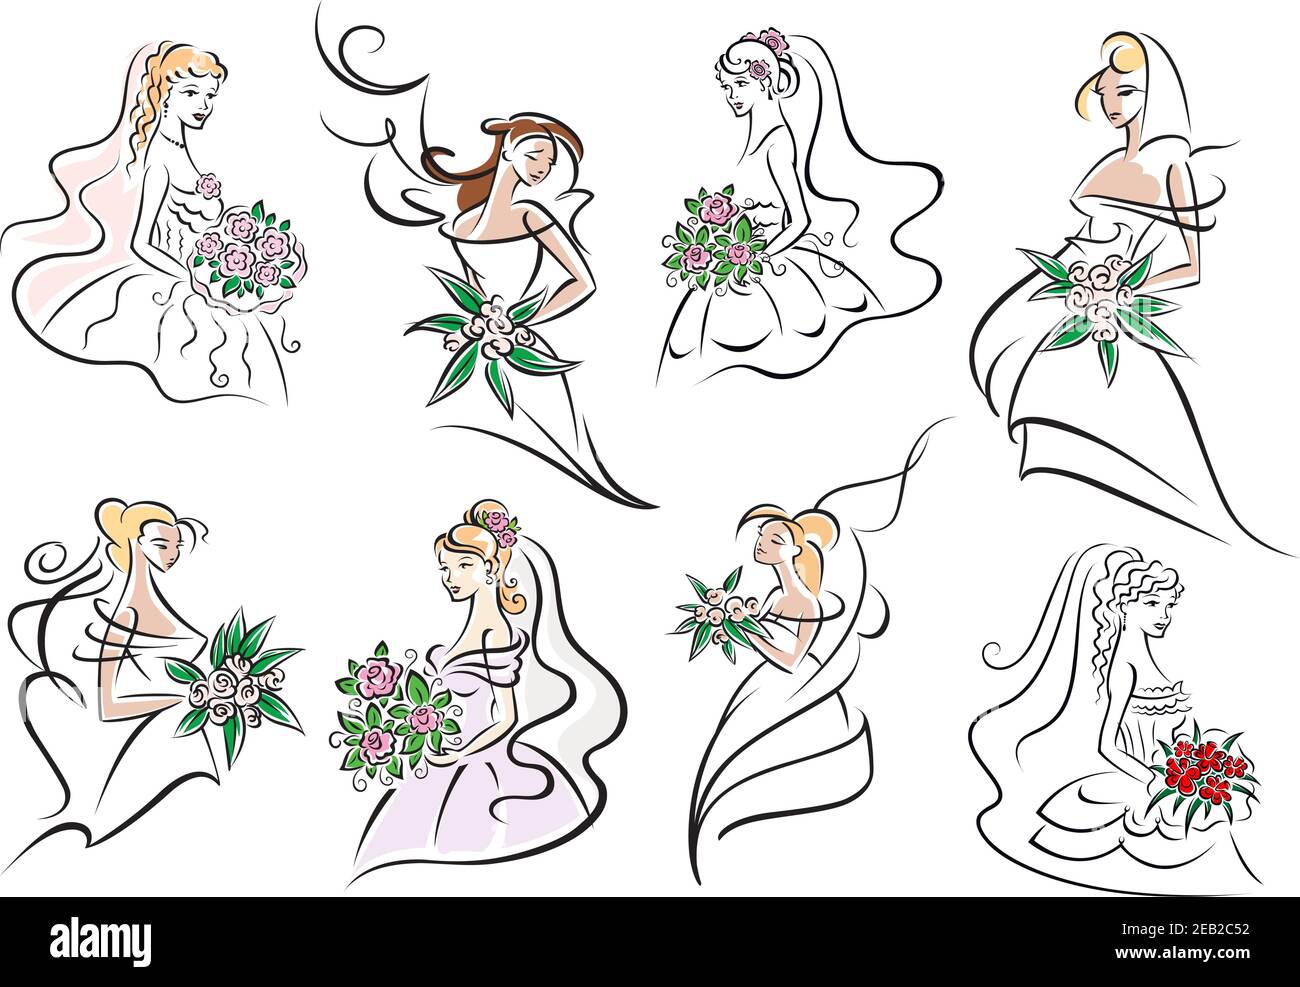 Pretty brides and bridesmaids in white dresses with elegant hairstyles, colorful bouquets in hands. For wedding or marriage ceremony design Stock Vector